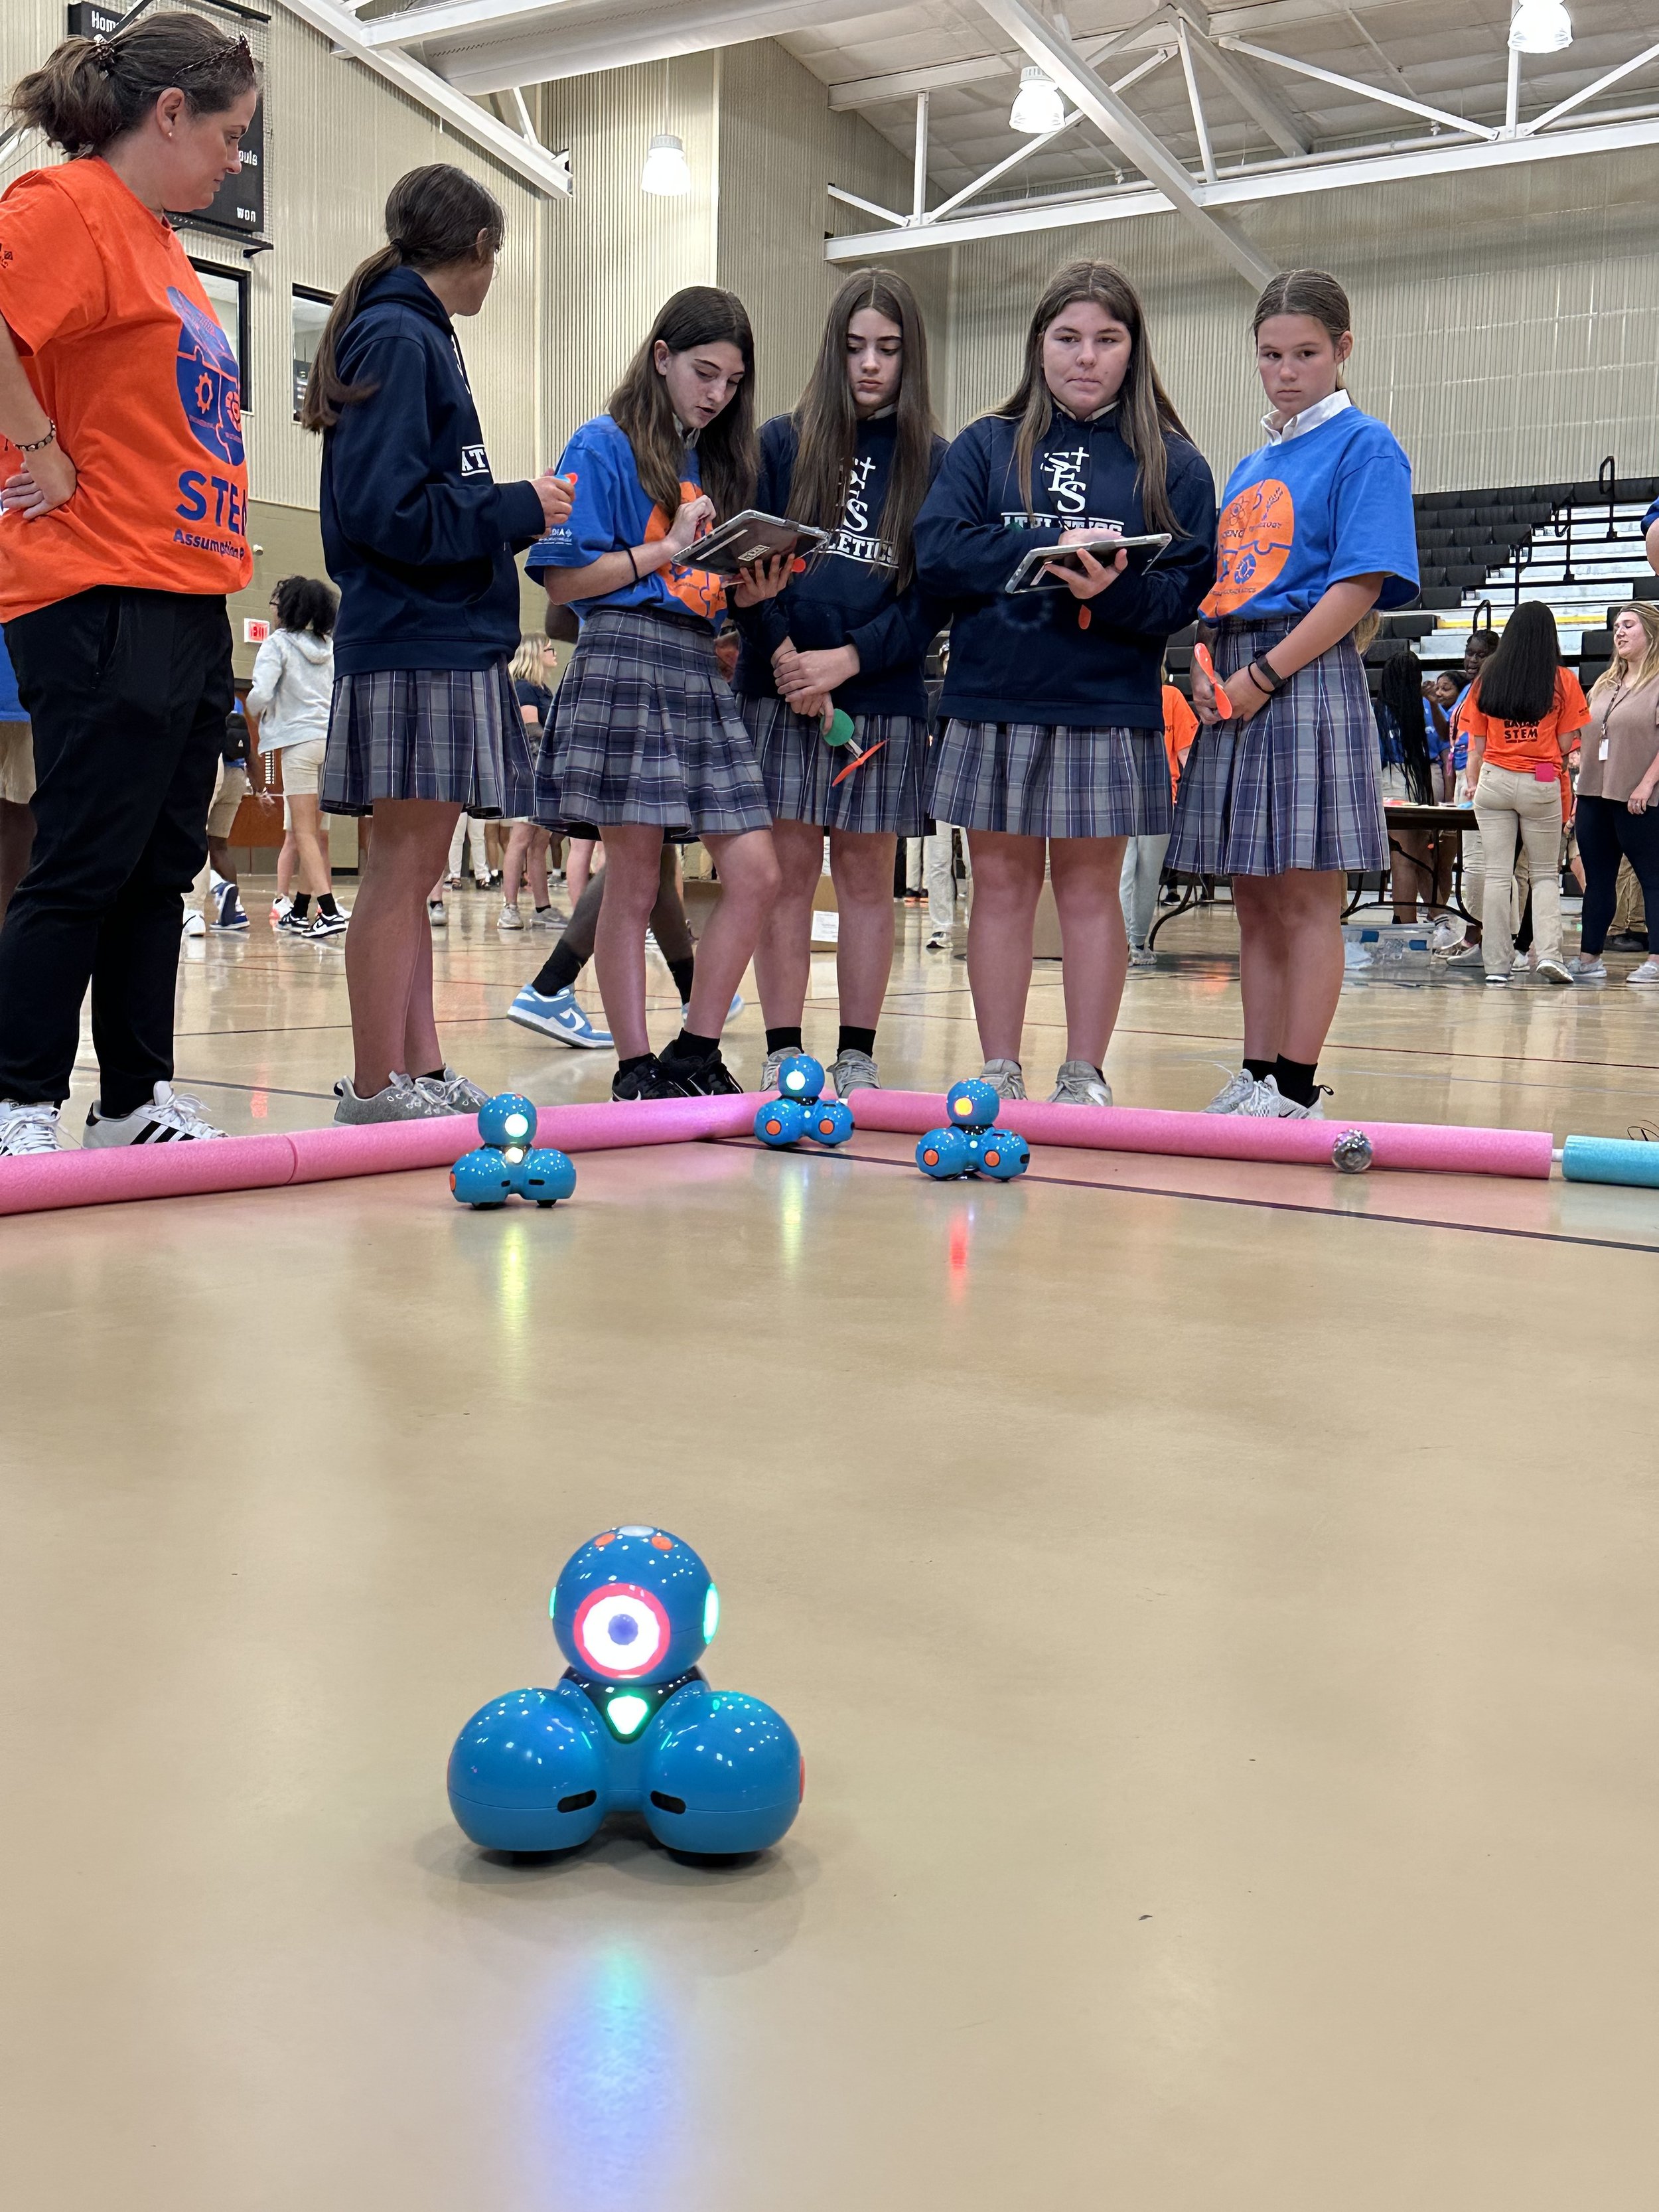  St. Elizabeth School Volunteer Danielle Blanchard, left, watches some of her school’s 7th graders work together to use software coding to remotely operate small robots during the Assumption Parish STEM Challenge Day. The students are, from left to r